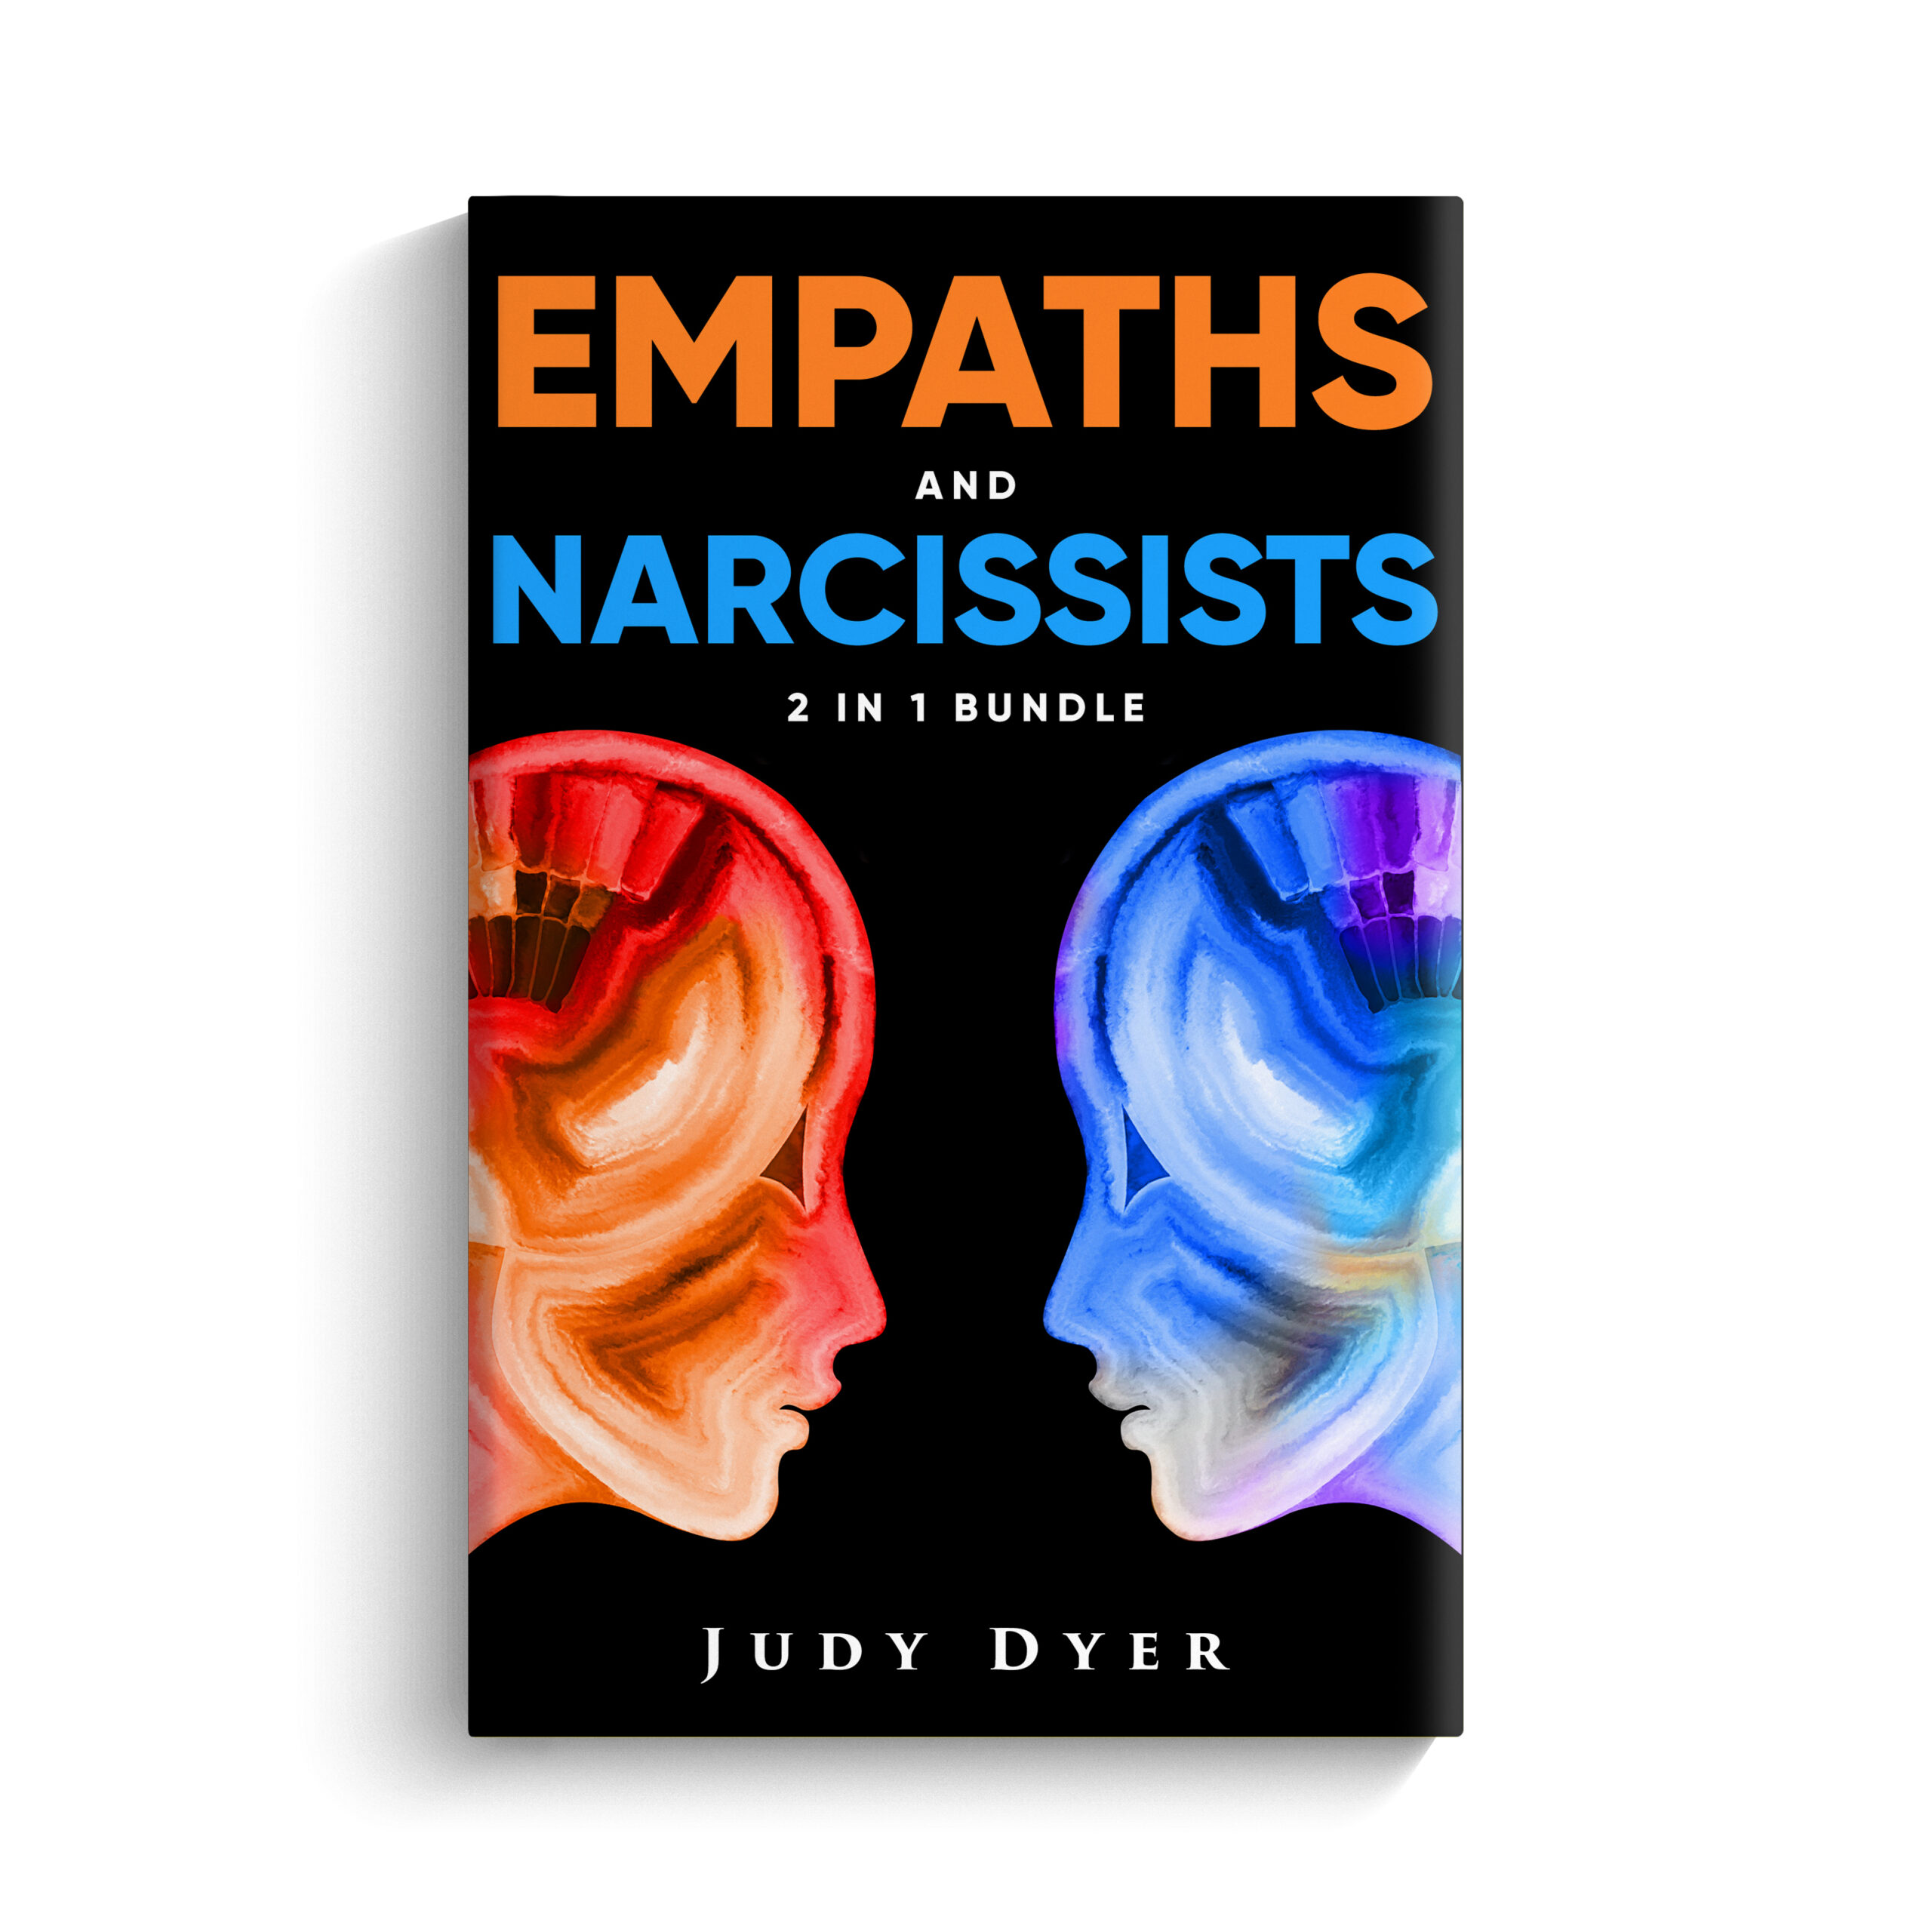 Empaths and Narcissists by Judy Dyer